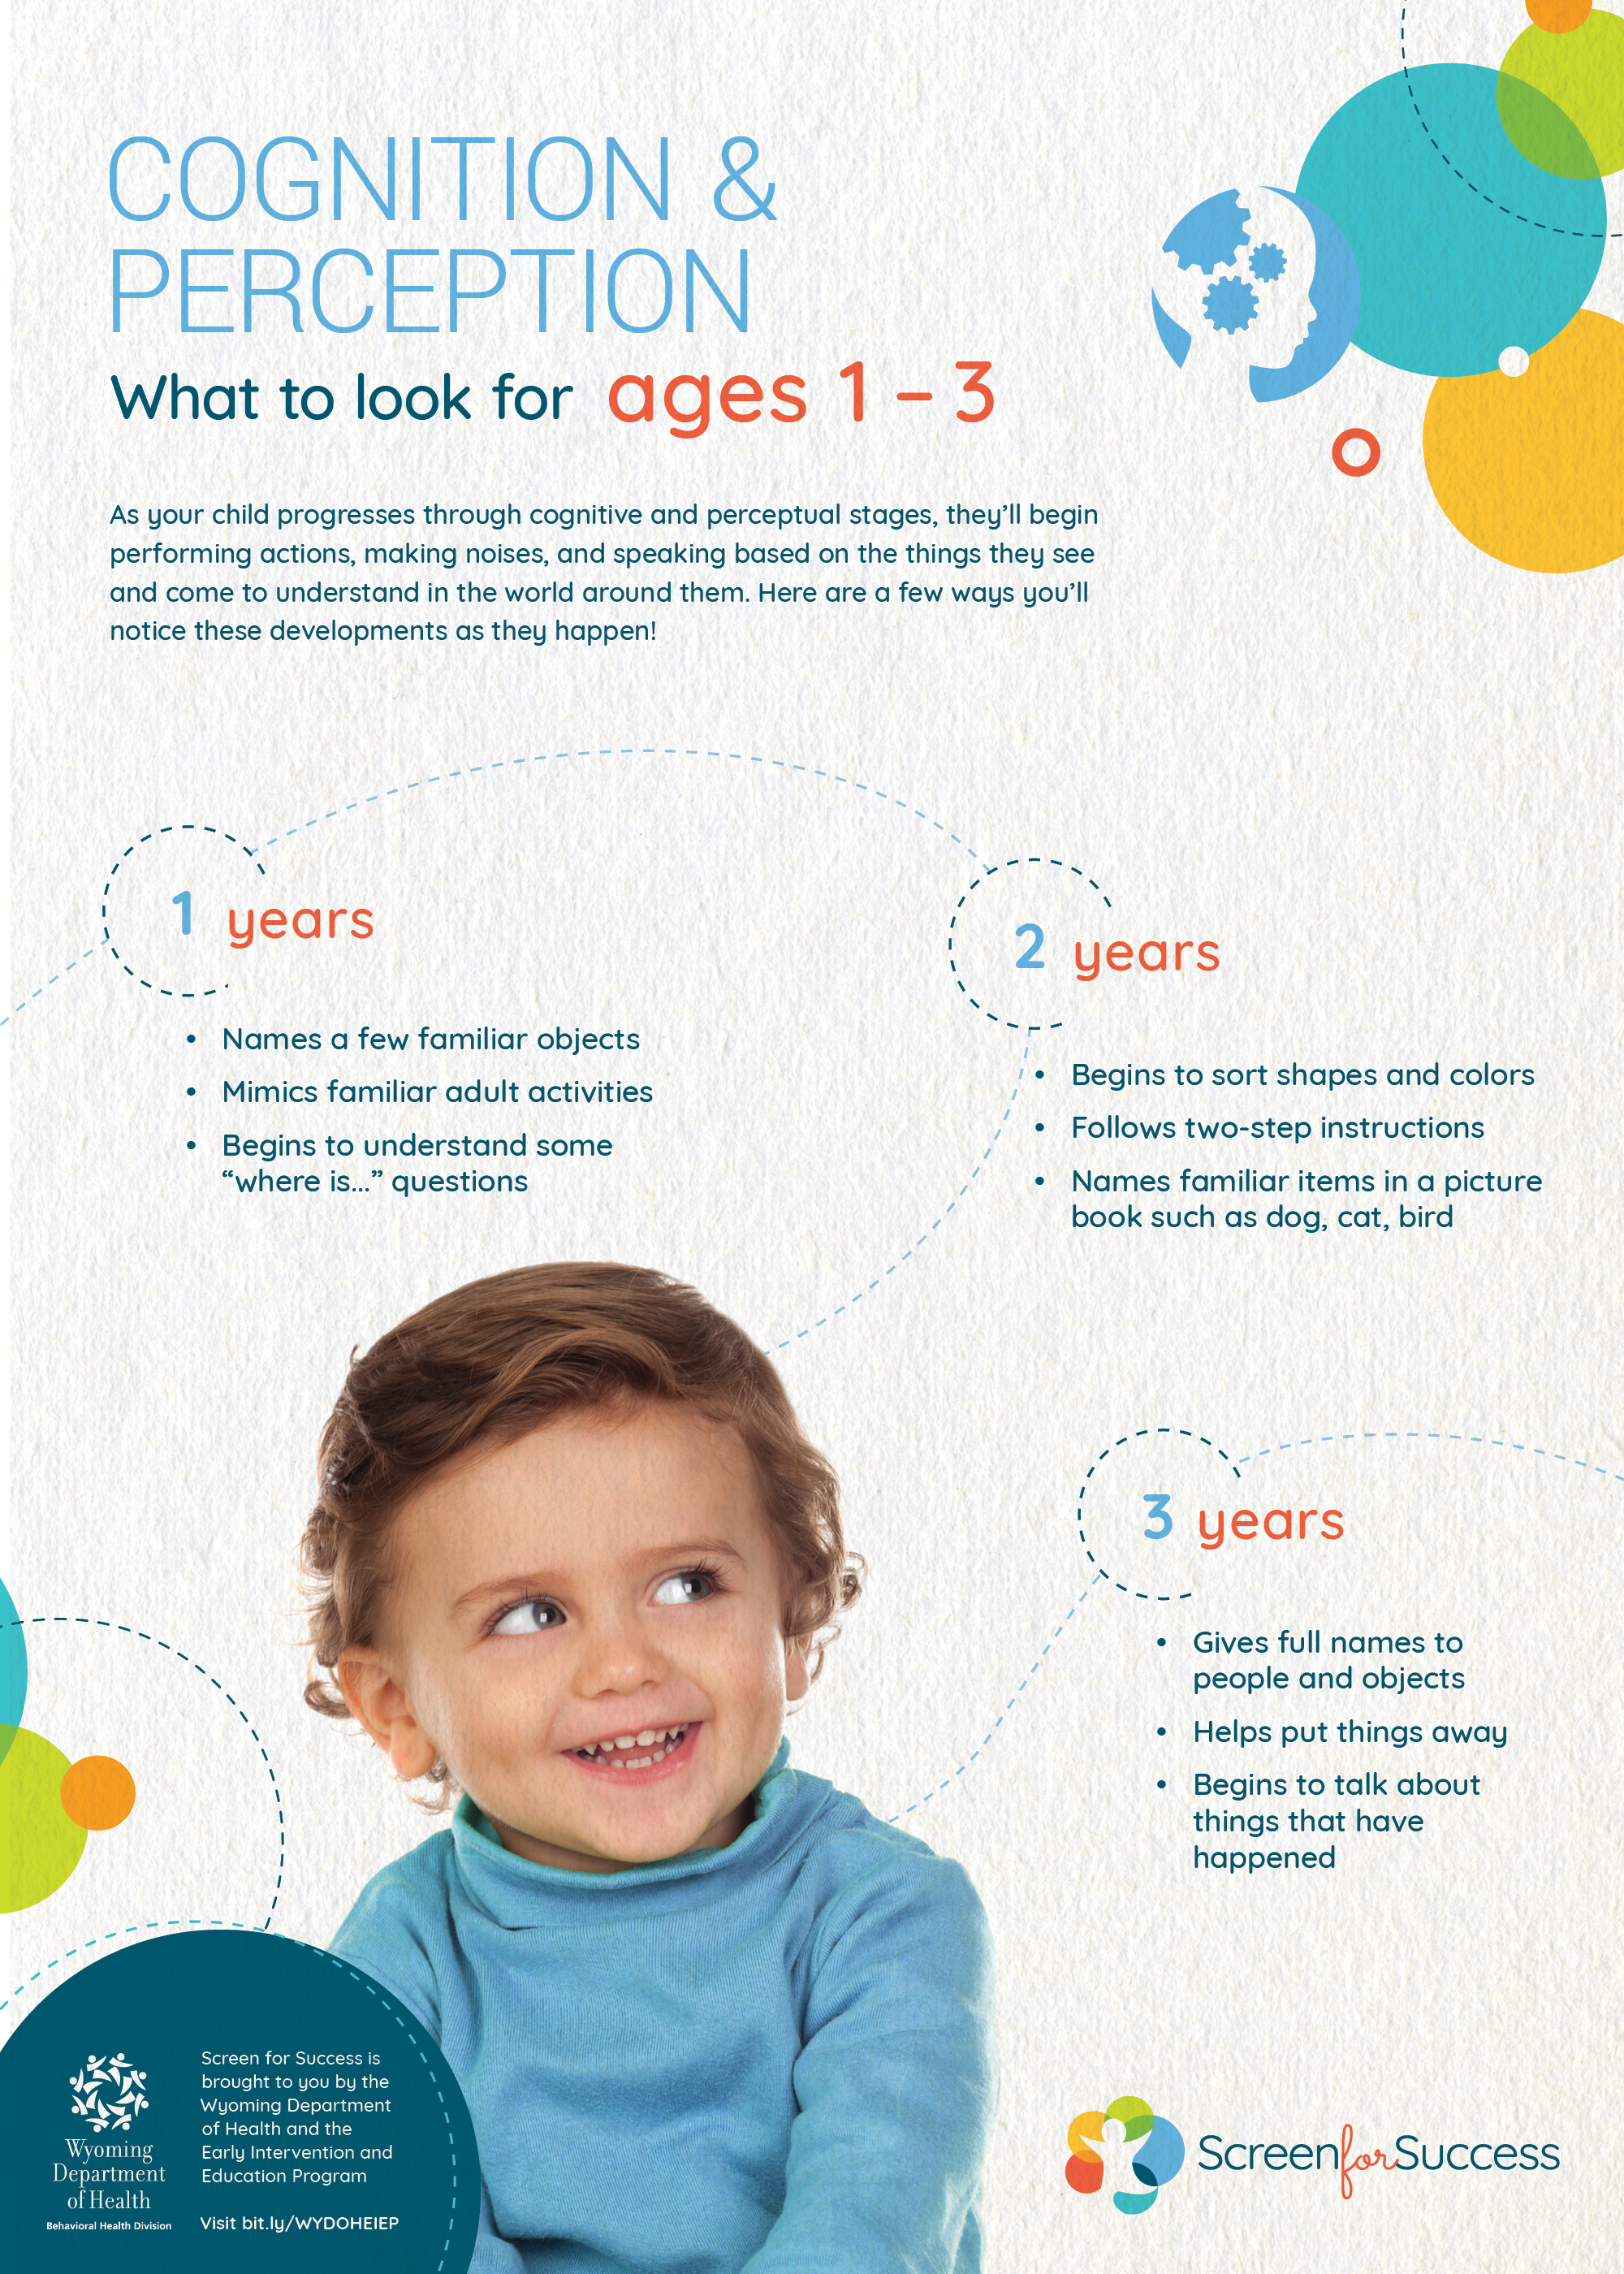 Cognition & Perception – What to Look for Ages 1 – 3